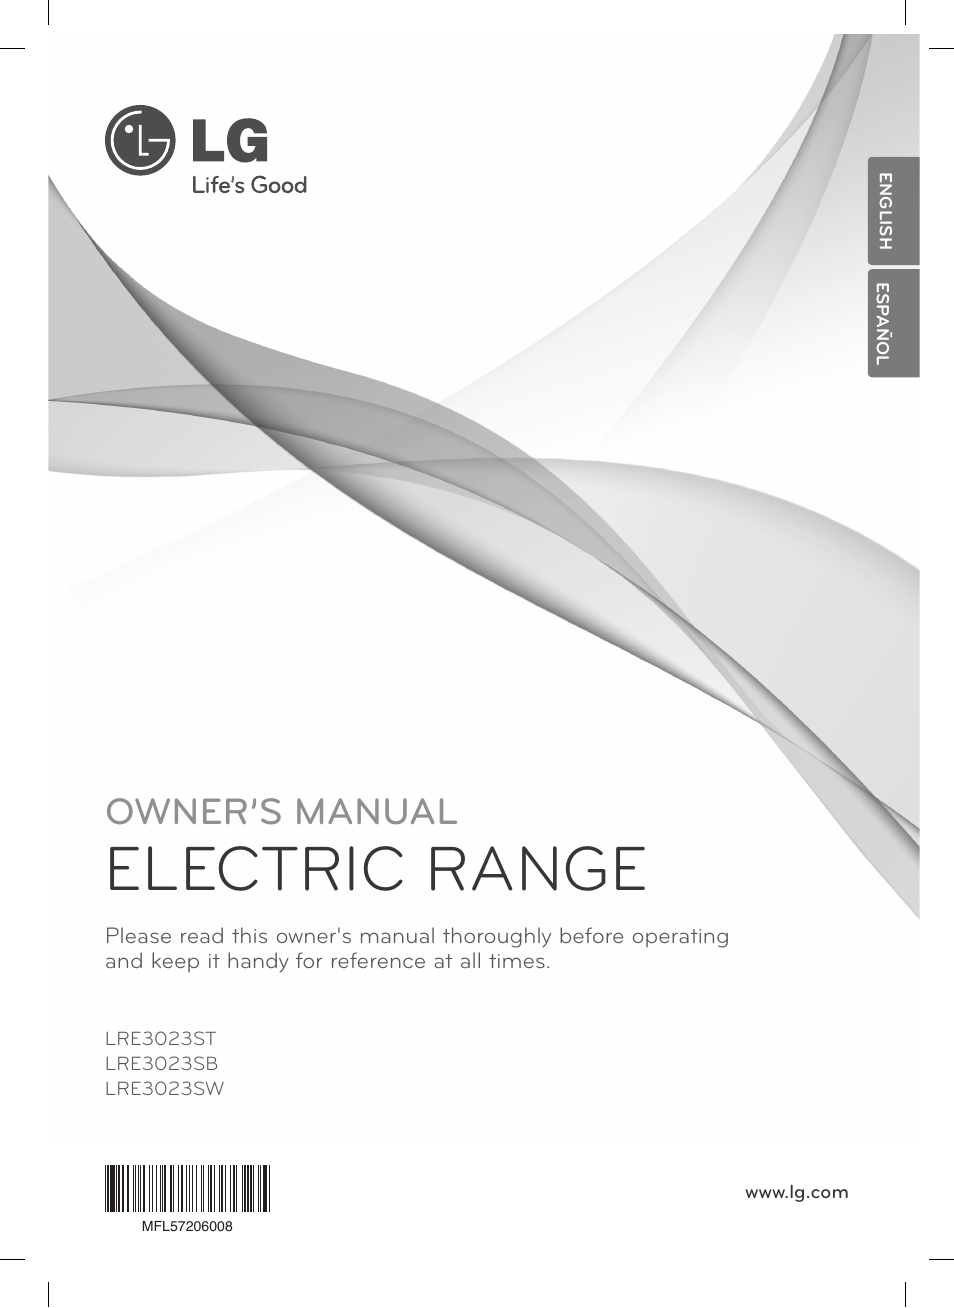 LG LRE3023SW User Manual | 84 pages | Also for: LRE3023ST, LRE3023SB